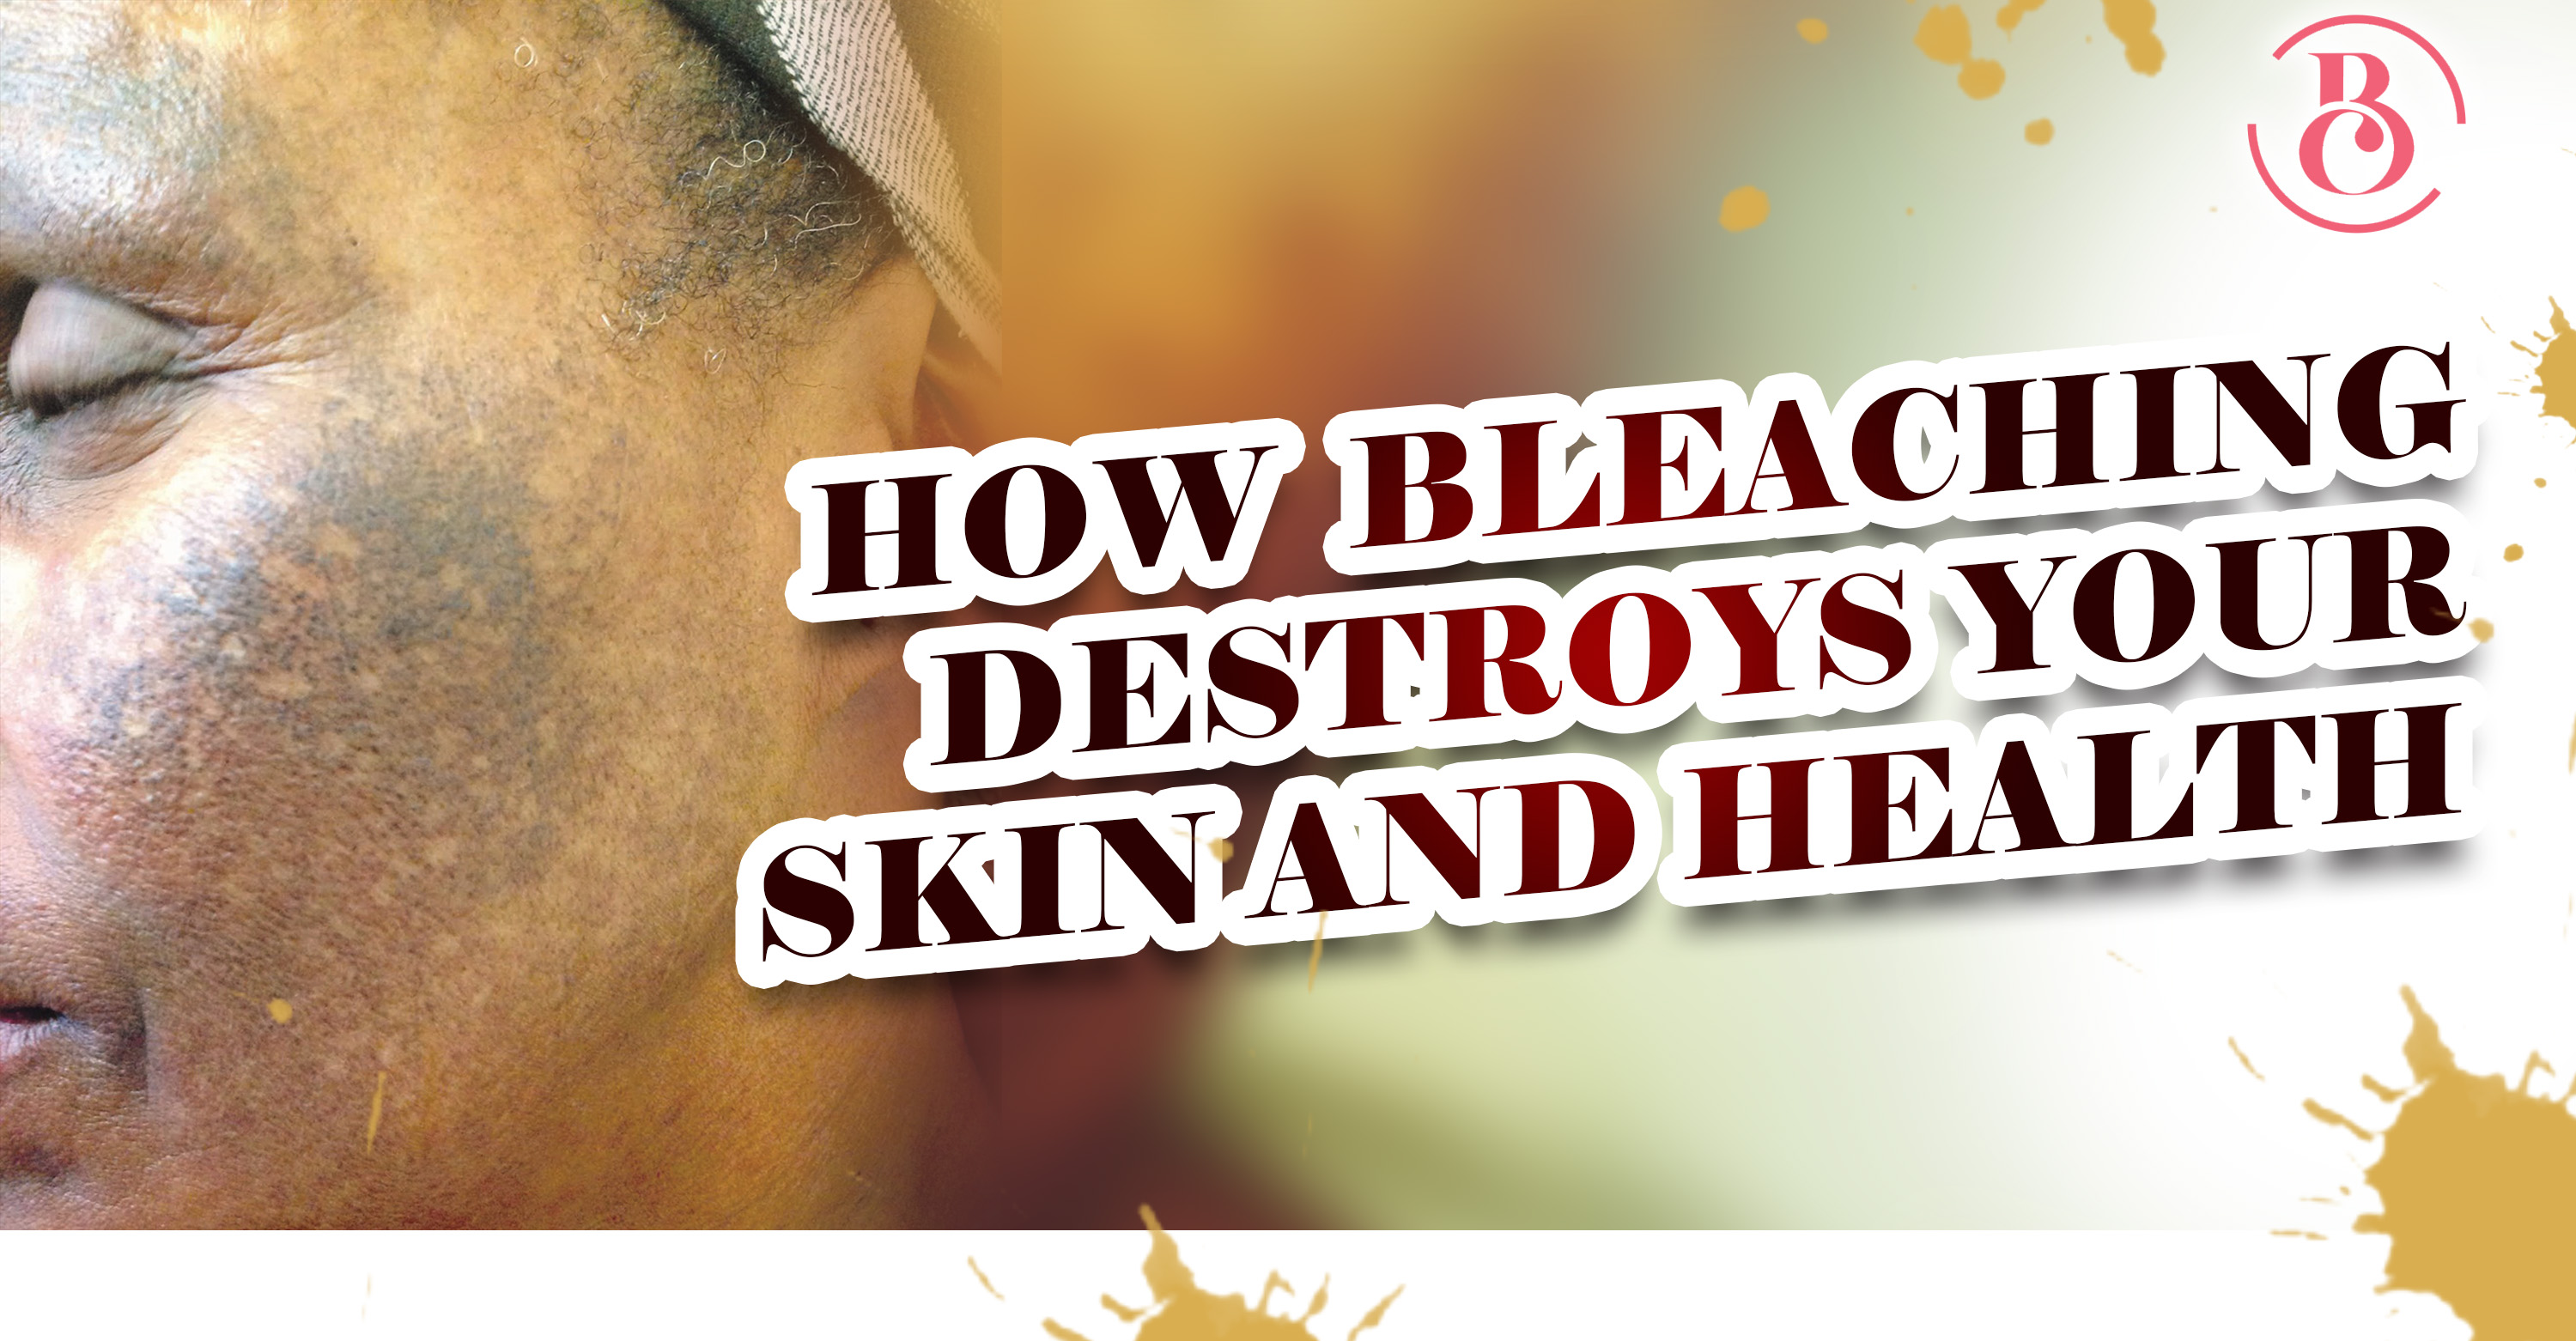 5 Ways Bleaching Destroys Your Skin and Health